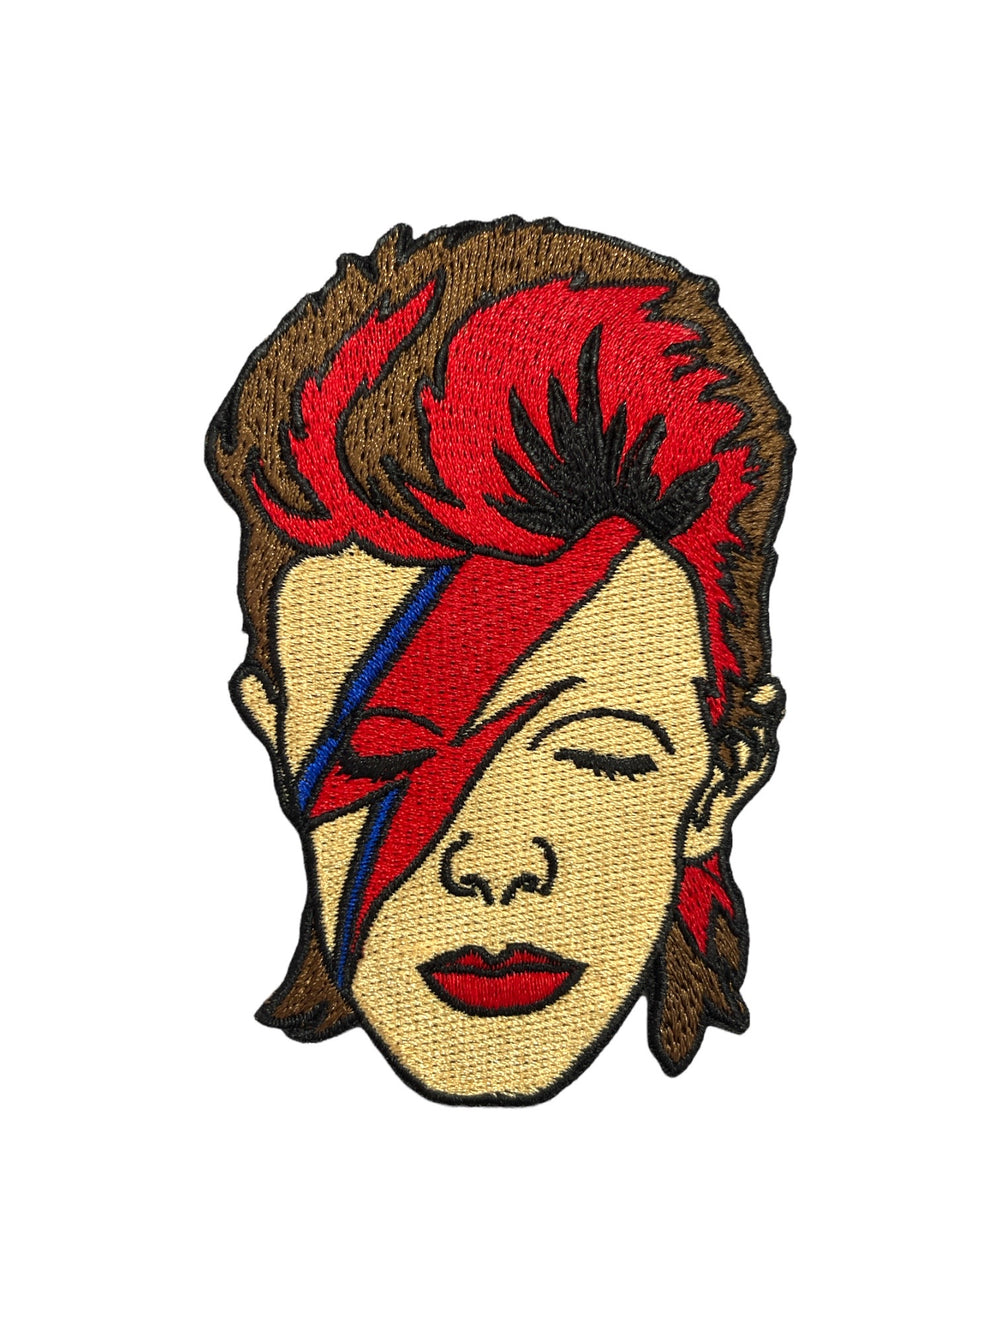 David Bowie Aladdin Sane Official Woven Patch Brand New